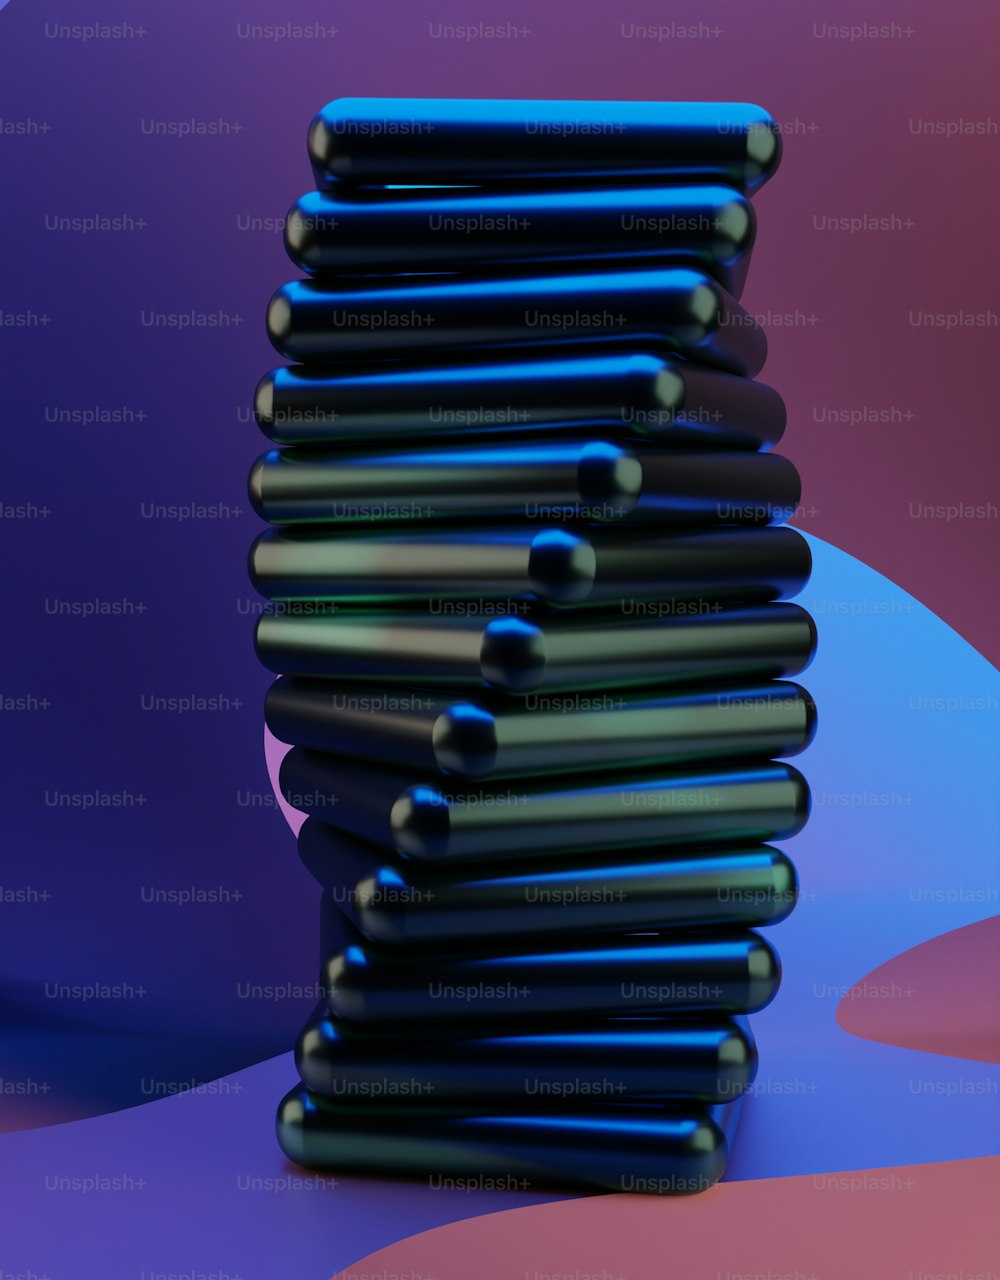 a stack of black objects sitting on top of a purple and blue background